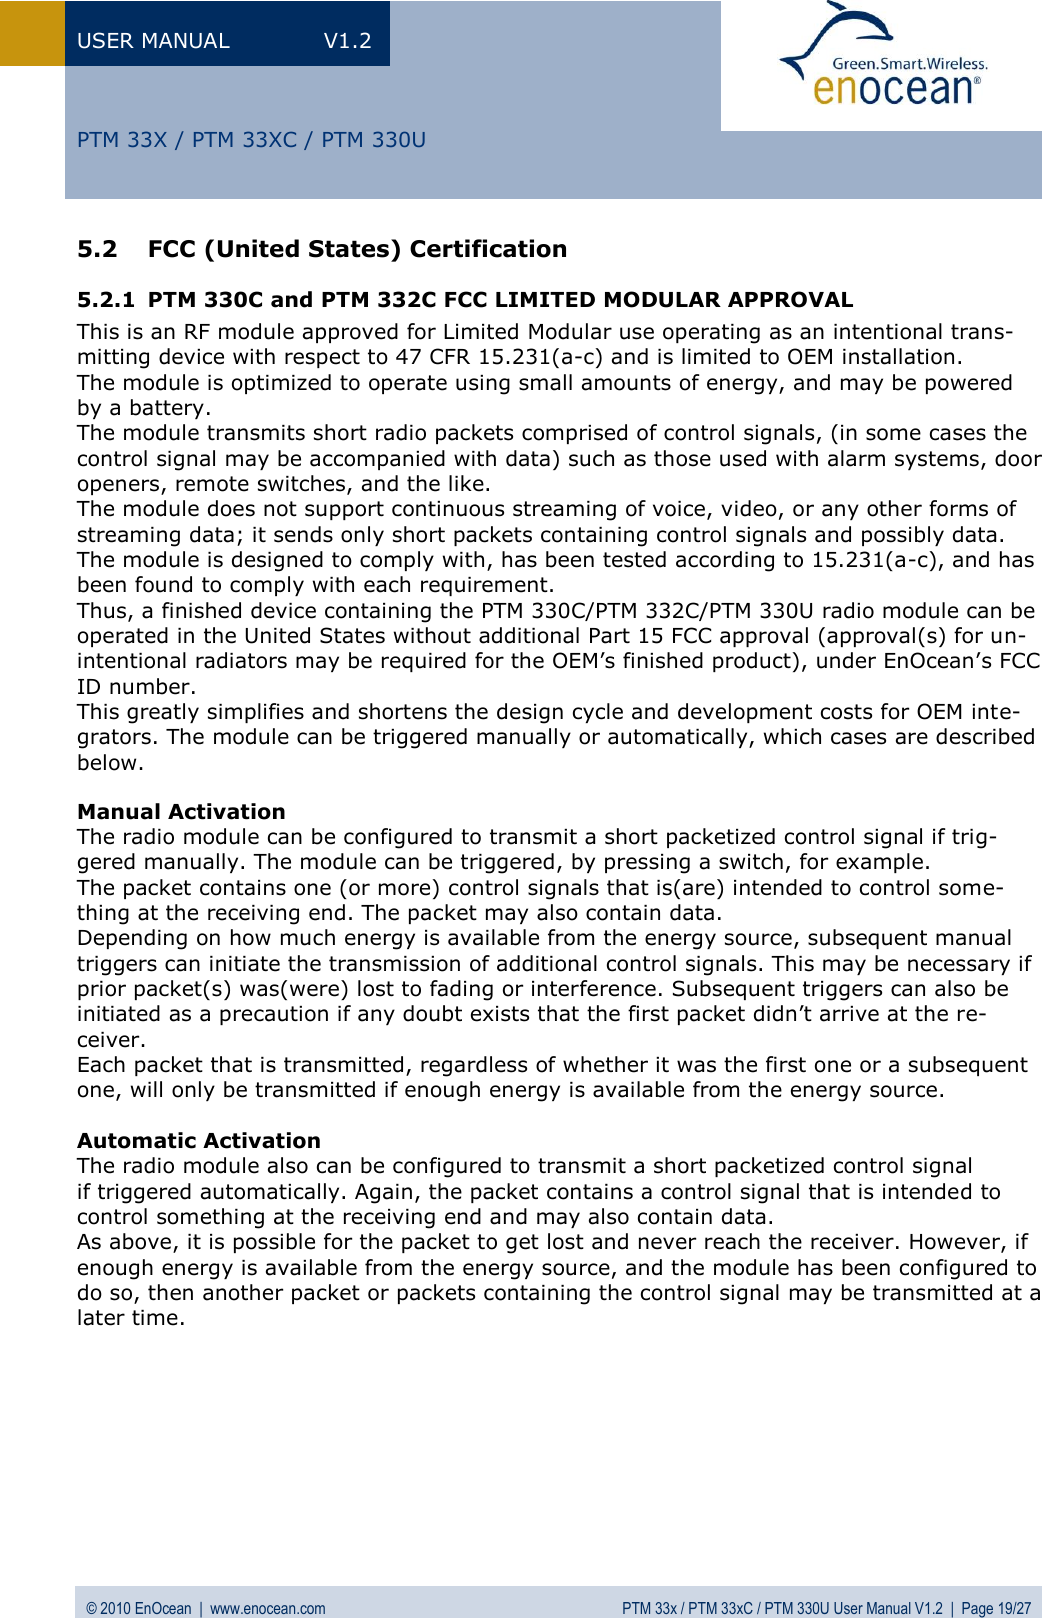 USER MANUAL  V1.2 © 2010 EnOcean  |  www.enocean.com  PTM 33x / PTM 33xC / PTM 330U User Manual V1.2  |  Page 19/27   PTM 33X / PTM 33XC / PTM 330U 5.2 FCC (United States) Certification  5.2.1 PTM 330C and PTM 332C FCC LIMITED MODULAR APPROVAL This is an RF module approved for Limited Modular use operating as an intentional trans-mitting device with respect to 47 CFR 15.231(a-c) and is limited to OEM installation.  The module is optimized to operate using small amounts of energy, and may be powered by a battery.  The module transmits short radio packets comprised of control signals, (in some cases the control signal may be accompanied with data) such as those used with alarm systems, door openers, remote switches, and the like.  The module does not support continuous streaming of voice, video, or any other forms of streaming data; it sends only short packets containing control signals and possibly data. The module is designed to comply with, has been tested according to 15.231(a-c), and has been found to comply with each requirement.  Thus, a finished device containing the PTM 330C/PTM 332C/PTM 330U radio module can be operated in the United States without additional Part 15 FCC approval (approval(s) for un-intentional radiators may be required for the OEM’s finished product), under EnOcean’s FCC ID number.  This greatly simplifies and shortens the design cycle and development costs for OEM inte-grators. The module can be triggered manually or automatically, which cases are described below.  Manual Activation The radio module can be configured to transmit a short packetized control signal if trig-gered manually. The module can be triggered, by pressing a switch, for example. The packet contains one (or more) control signals that is(are) intended to control some-thing at the receiving end. The packet may also contain data.  Depending on how much energy is available from the energy source, subsequent manual triggers can initiate the transmission of additional control signals. This may be necessary if prior packet(s) was(were) lost to fading or interference. Subsequent triggers can also be initiated as a precaution if any doubt exists that the first packet didn’t arrive at the re-ceiver.  Each packet that is transmitted, regardless of whether it was the first one or a subsequent one, will only be transmitted if enough energy is available from the energy source.  Automatic Activation The radio module also can be configured to transmit a short packetized control signal if triggered automatically. Again, the packet contains a control signal that is intended to control something at the receiving end and may also contain data.  As above, it is possible for the packet to get lost and never reach the receiver. However, if enough energy is available from the energy source, and the module has been configured to do so, then another packet or packets containing the control signal may be transmitted at a later time.      